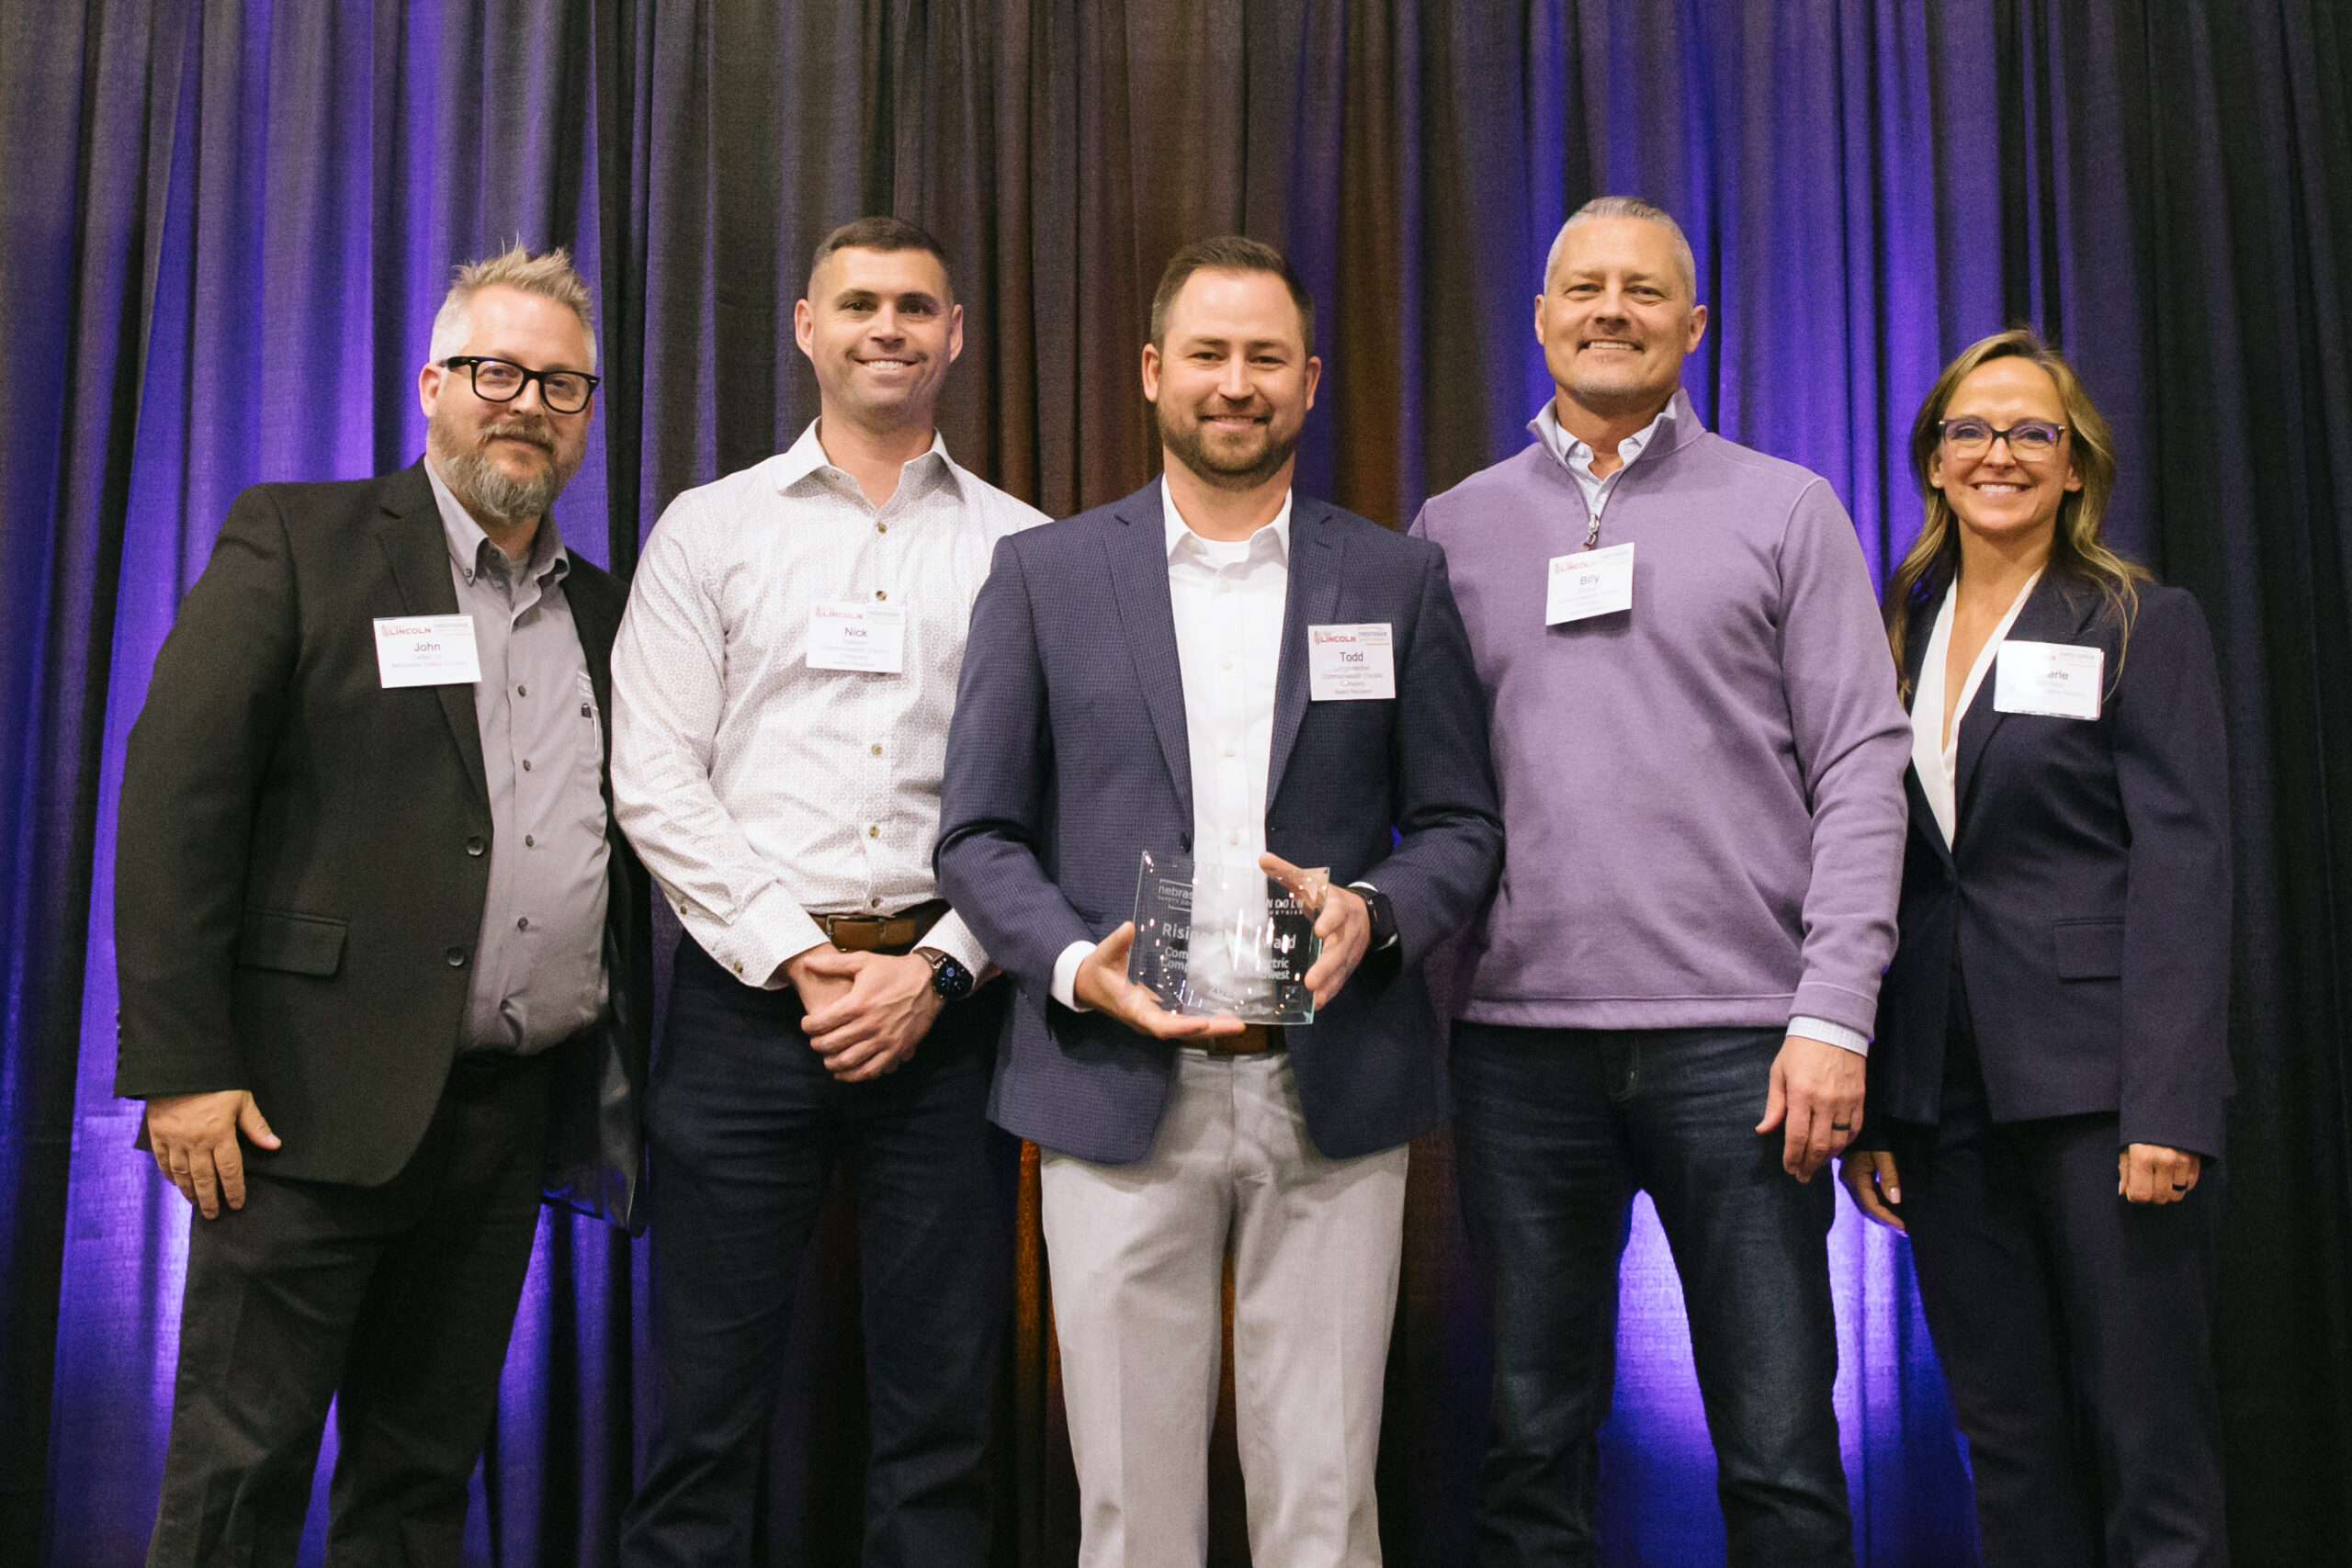 Commonwealth Electric Company of the Midwest Receives Workplace Safety Award